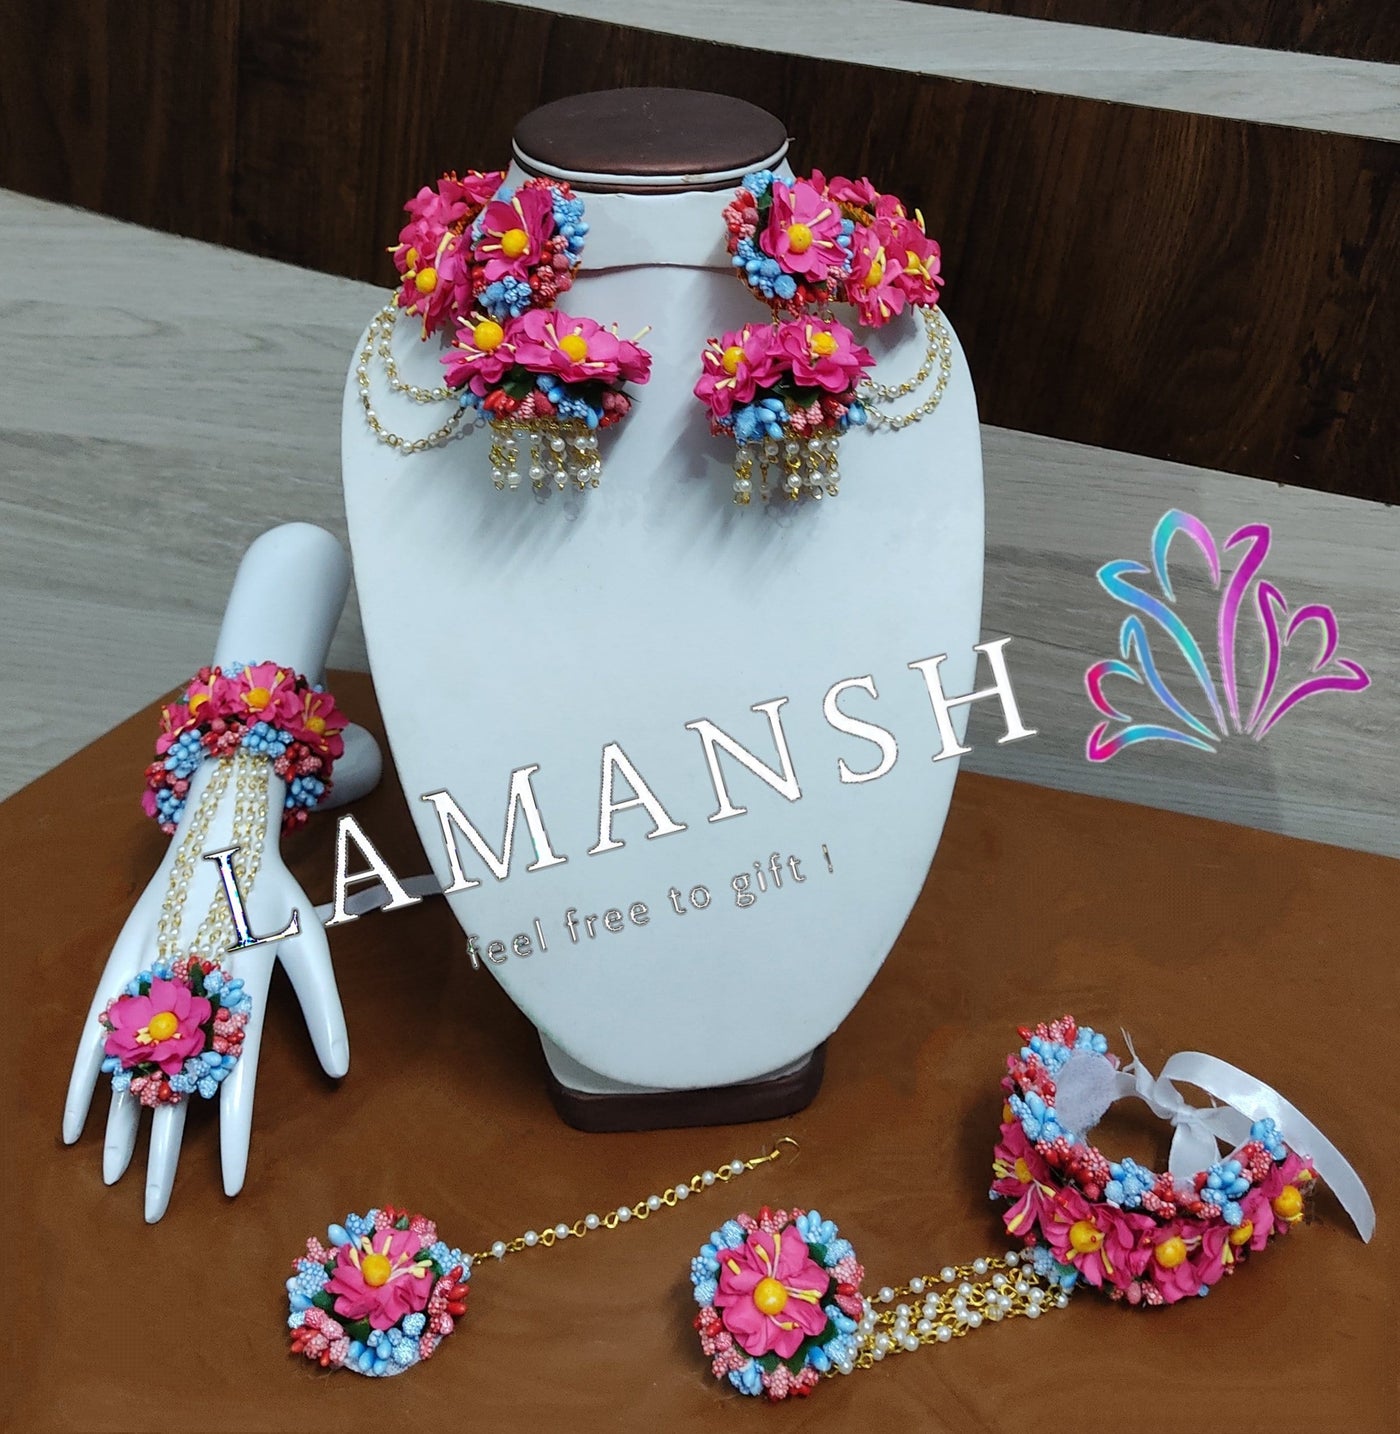 Lamansh Flower 🌺 Jewellery 2 Earrings with side chain to hair , 1 Maangtika & 2 Bracelets Attached with ring / Dark Pink - Blue - Yellow - Red LAMANSH® Flower Jewellery Set For Women & Girls / Haldi Set